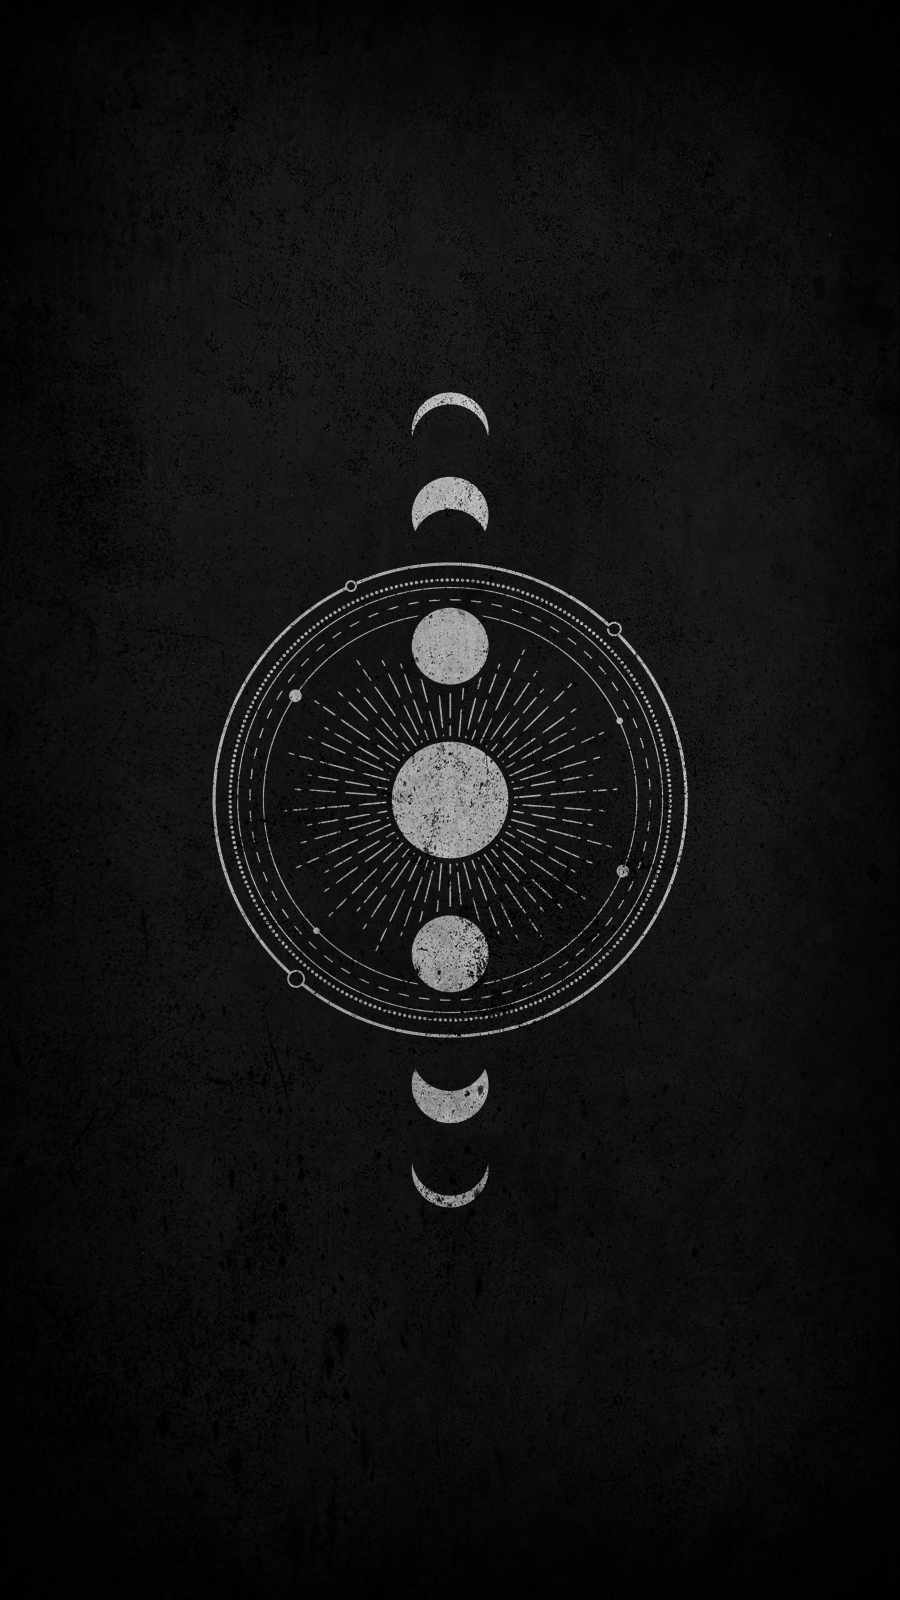 Phases Of Moon IPhone Wallpaper Wallpaper : iPhone Wallpaper